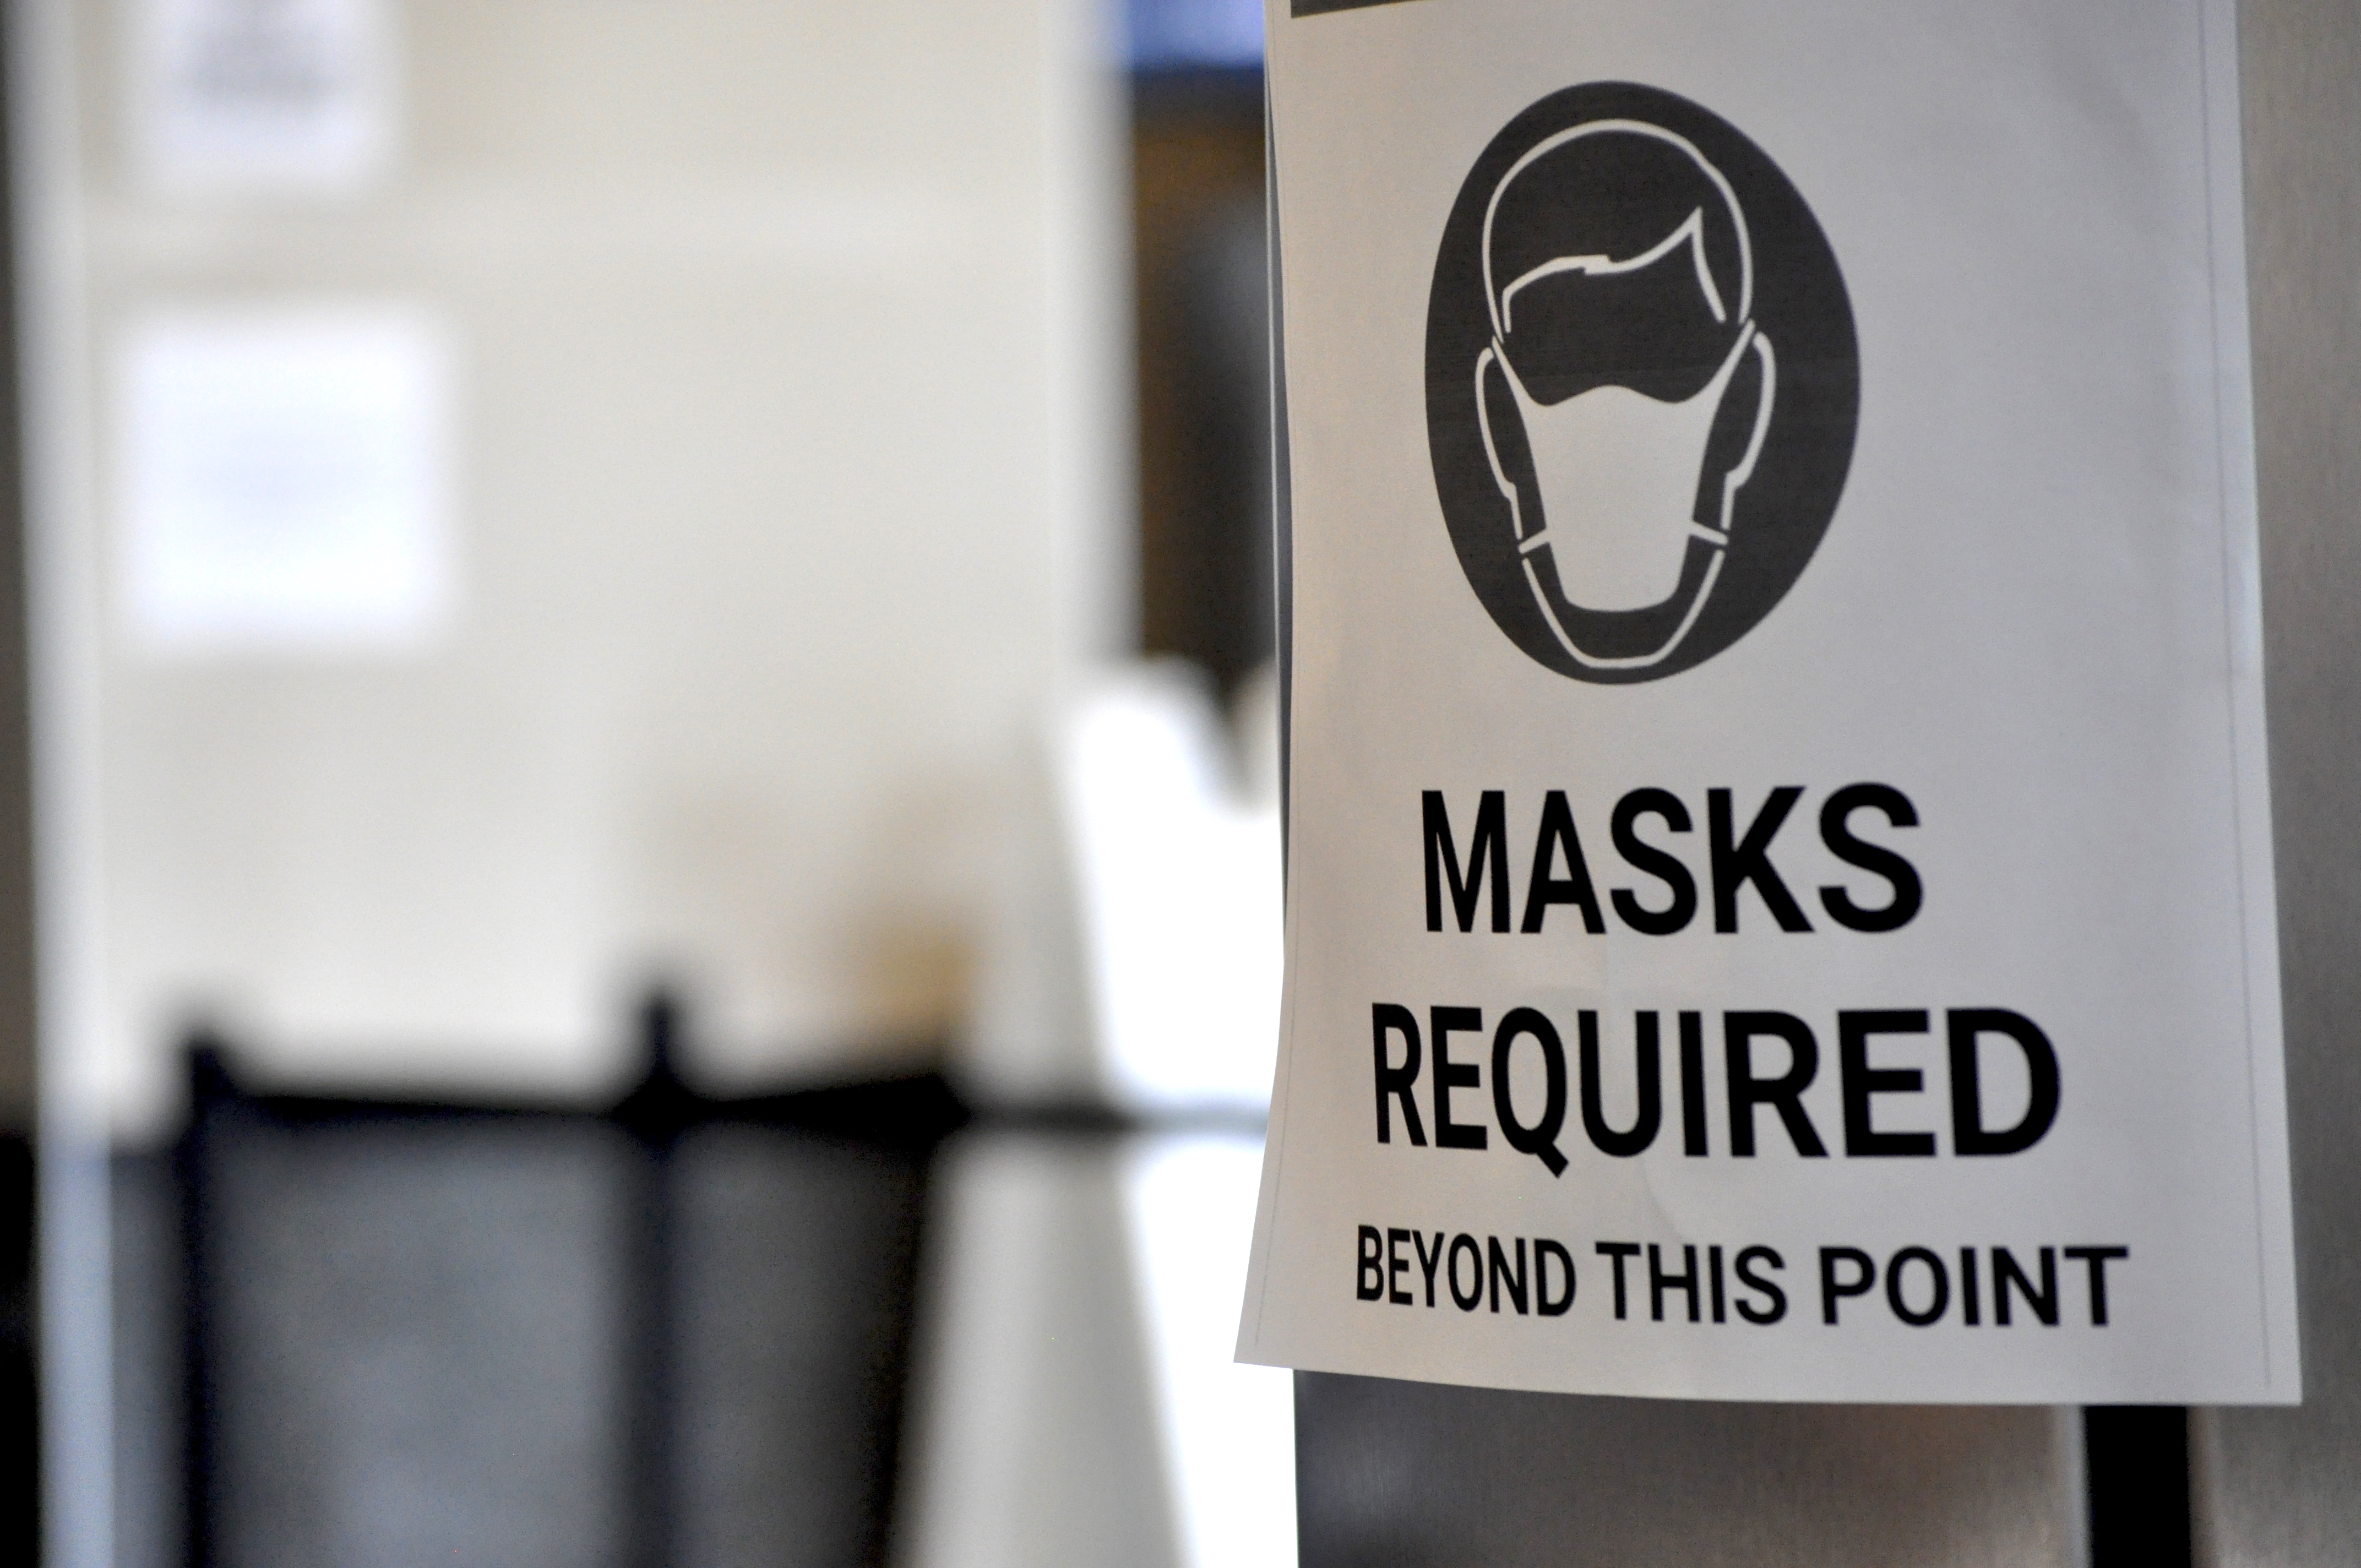 A sign at the Ted Stevens Anchorage International Airport near where people can get tested for COVID-19 (Liz Ruskin/Alaska Public Media)